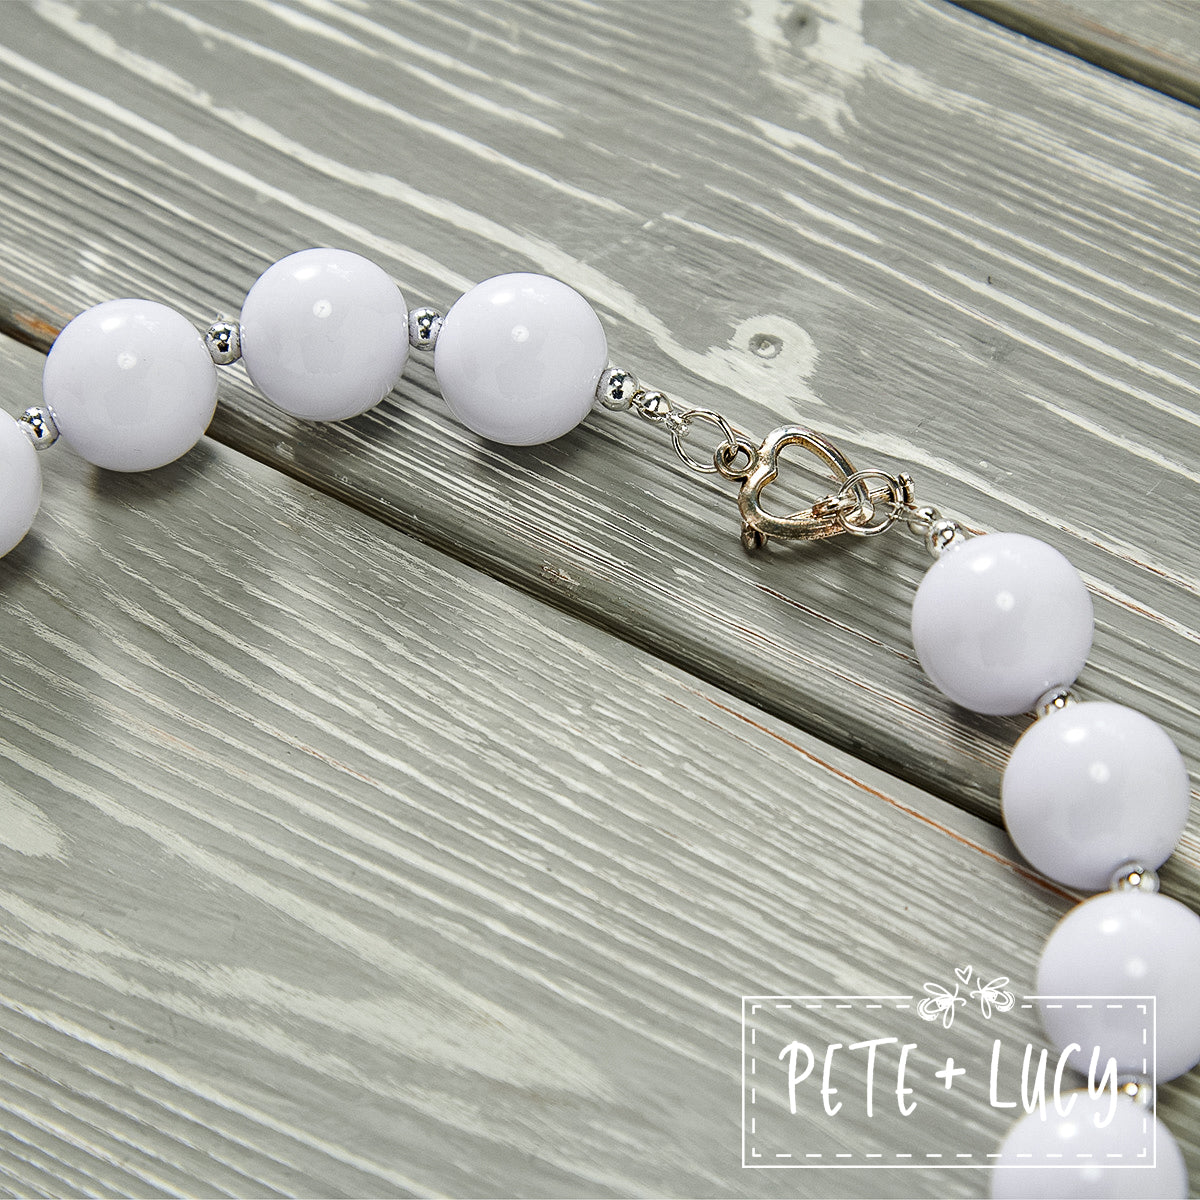 White Chunky Necklace